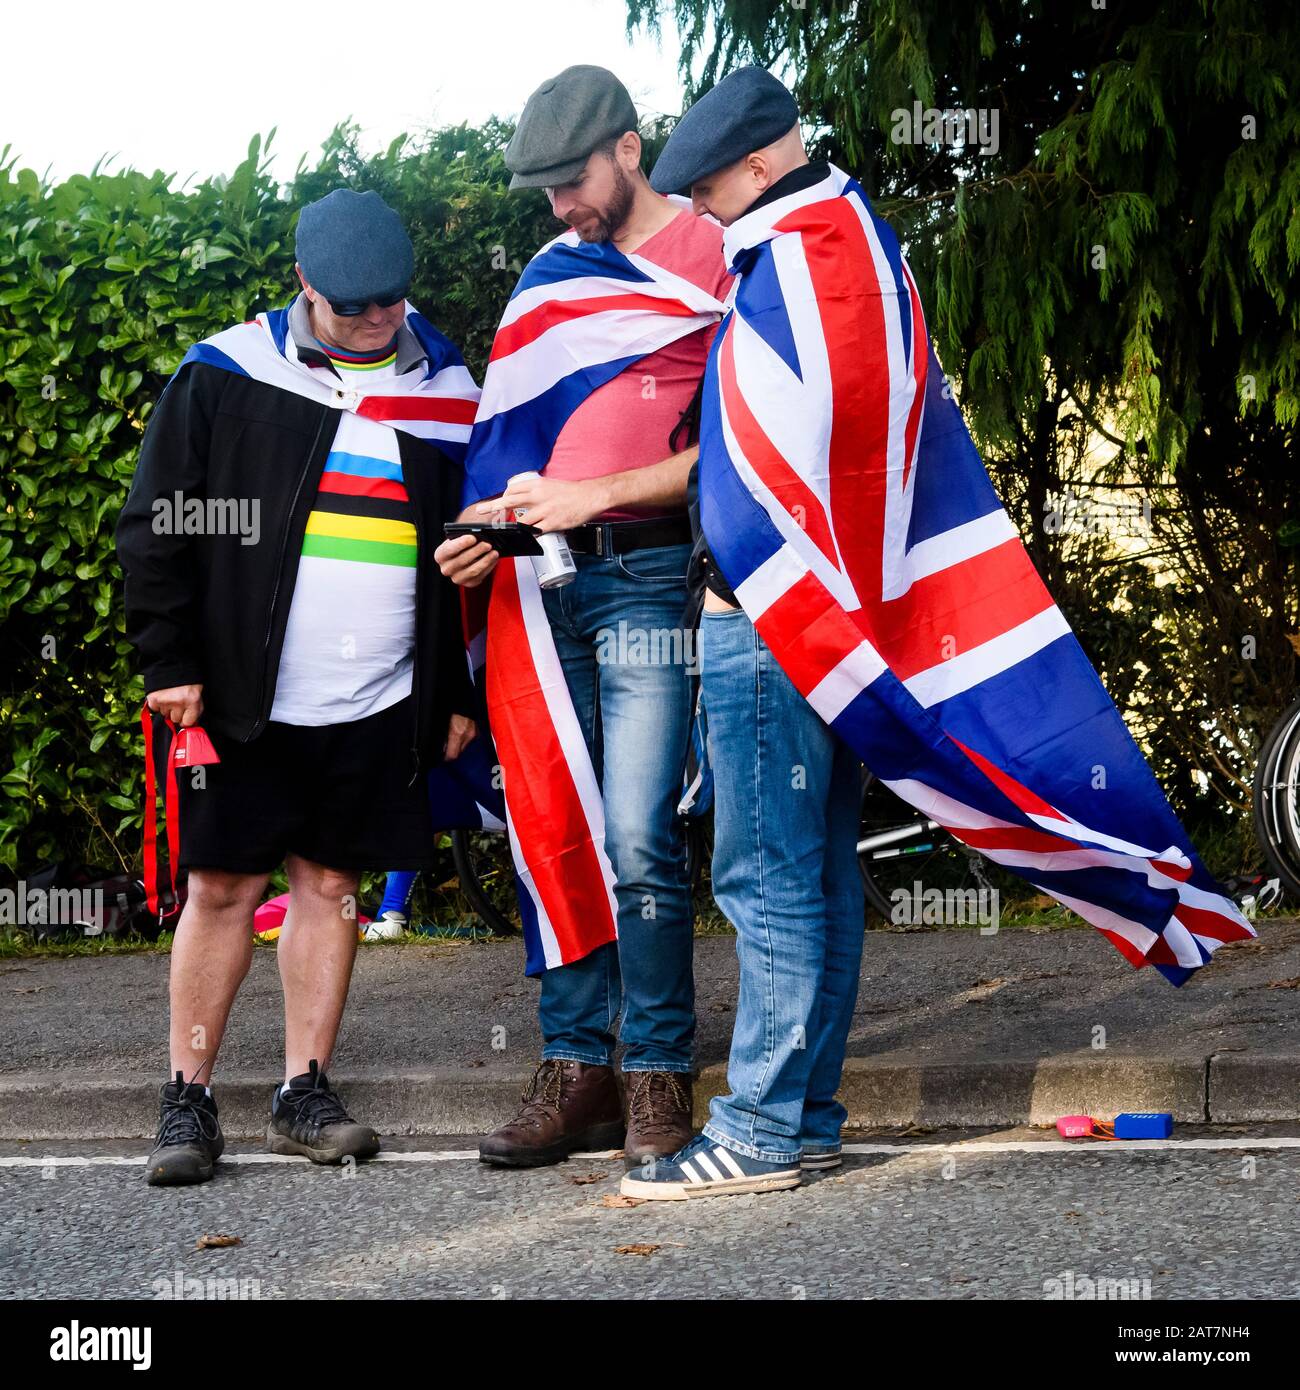 3 men looking at phone, standing at side of road, wearing flat caps & Union Jack flags, spectators at sports event - Harrogate, Yorkshire, England UK Stock Photo